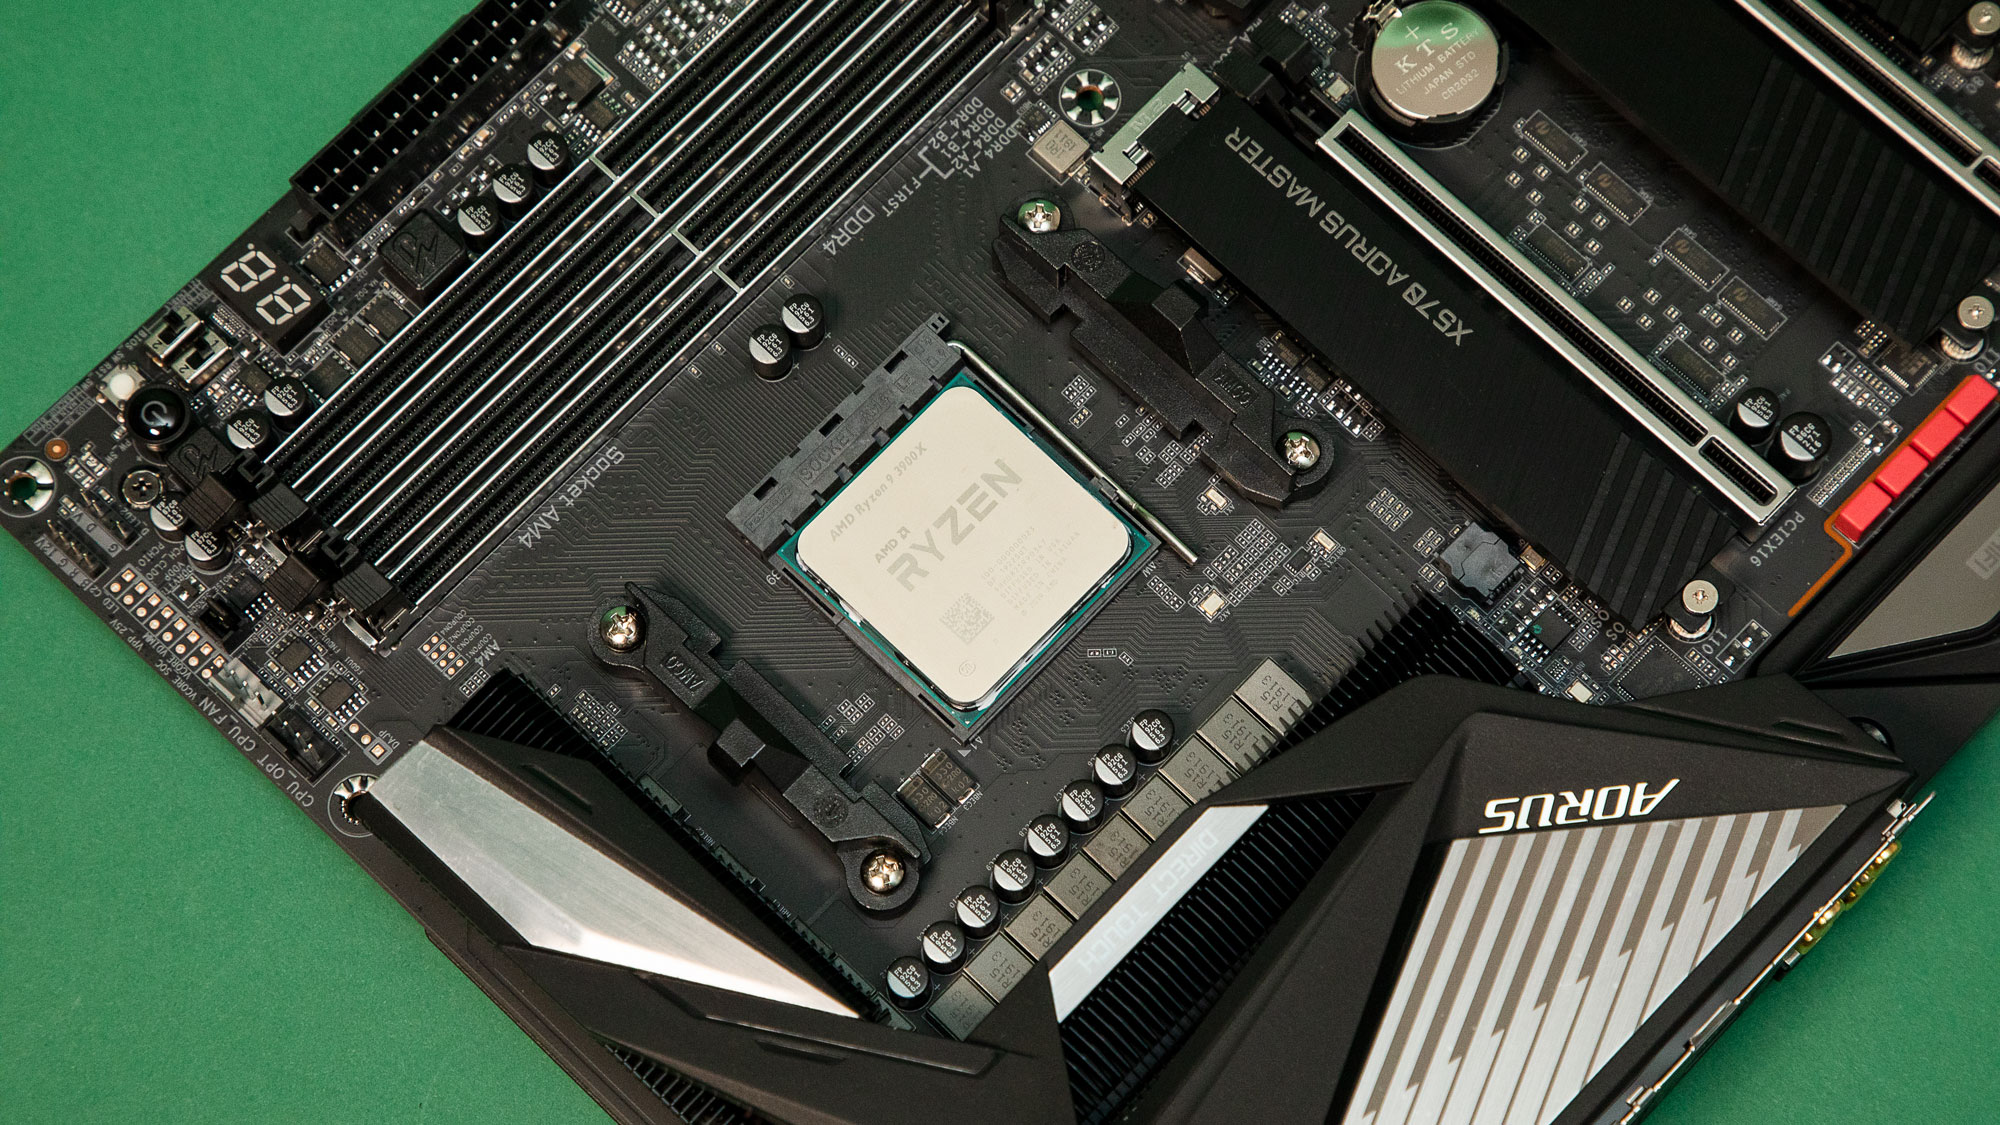 Rumored Amd Ryzen 5 3500 Could Take Out Intel S Budget Cpus Going By This Leak Techradar